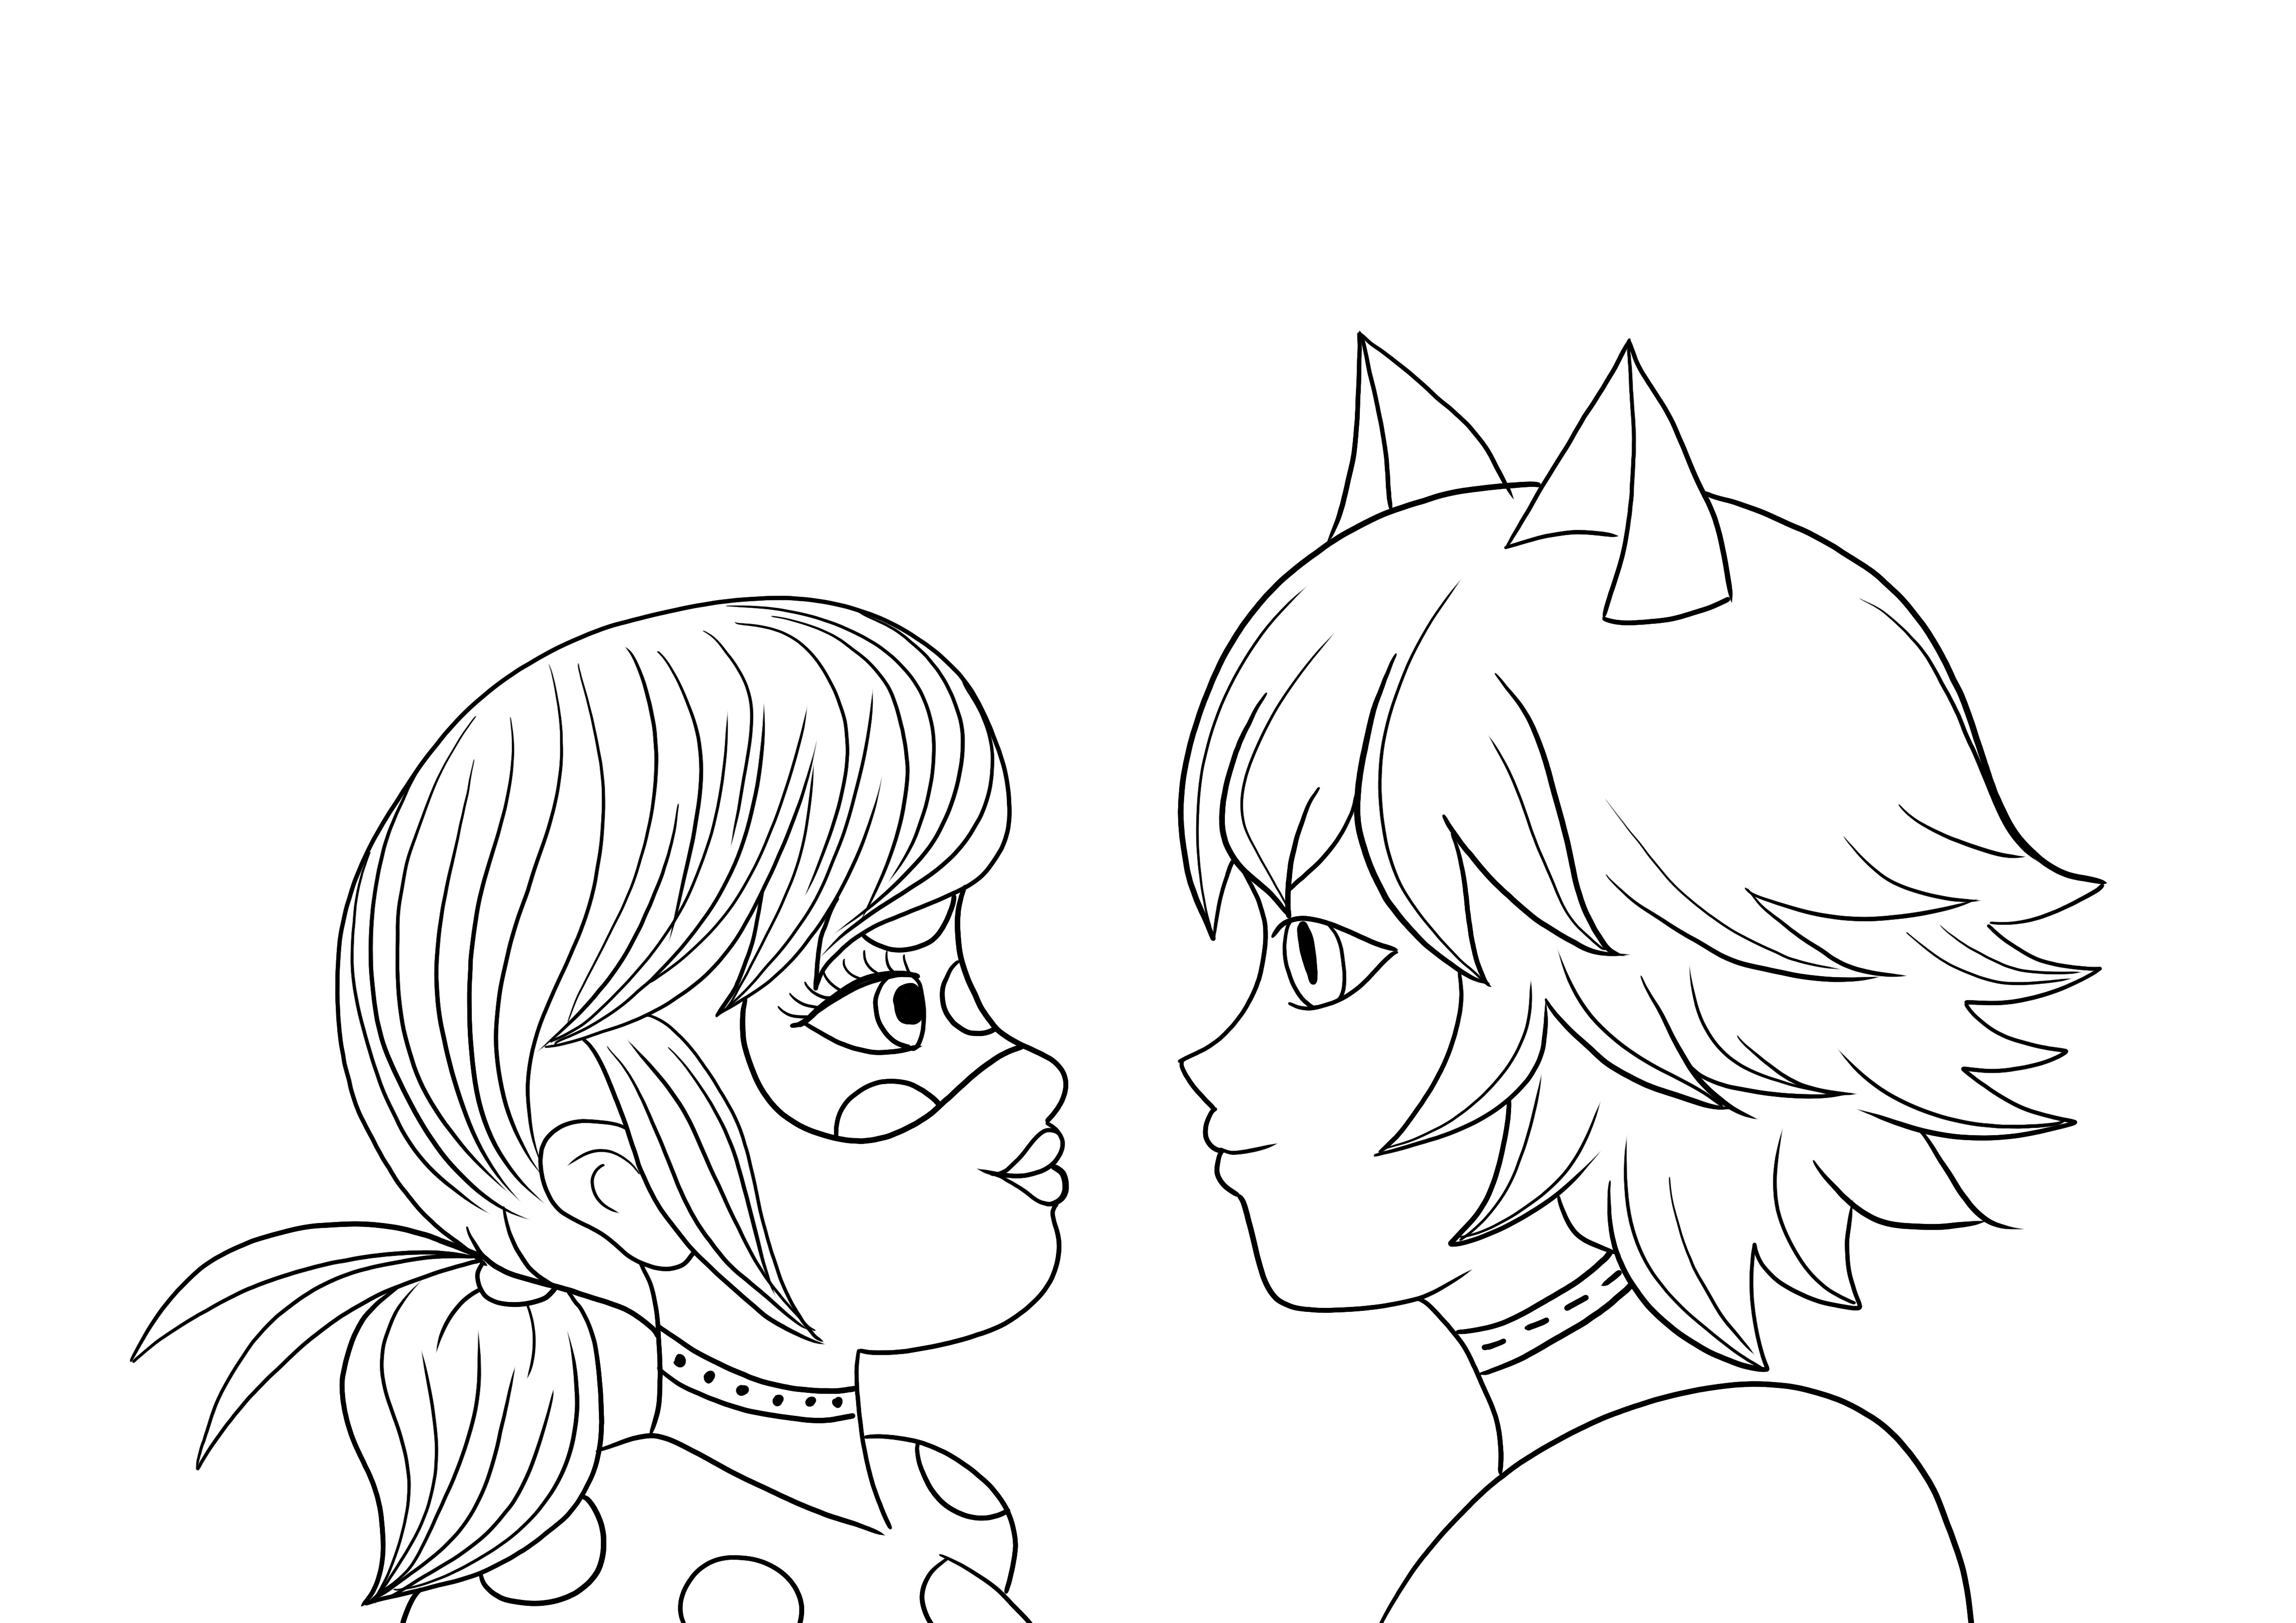 Marinette and Adrien in love coloring page for free